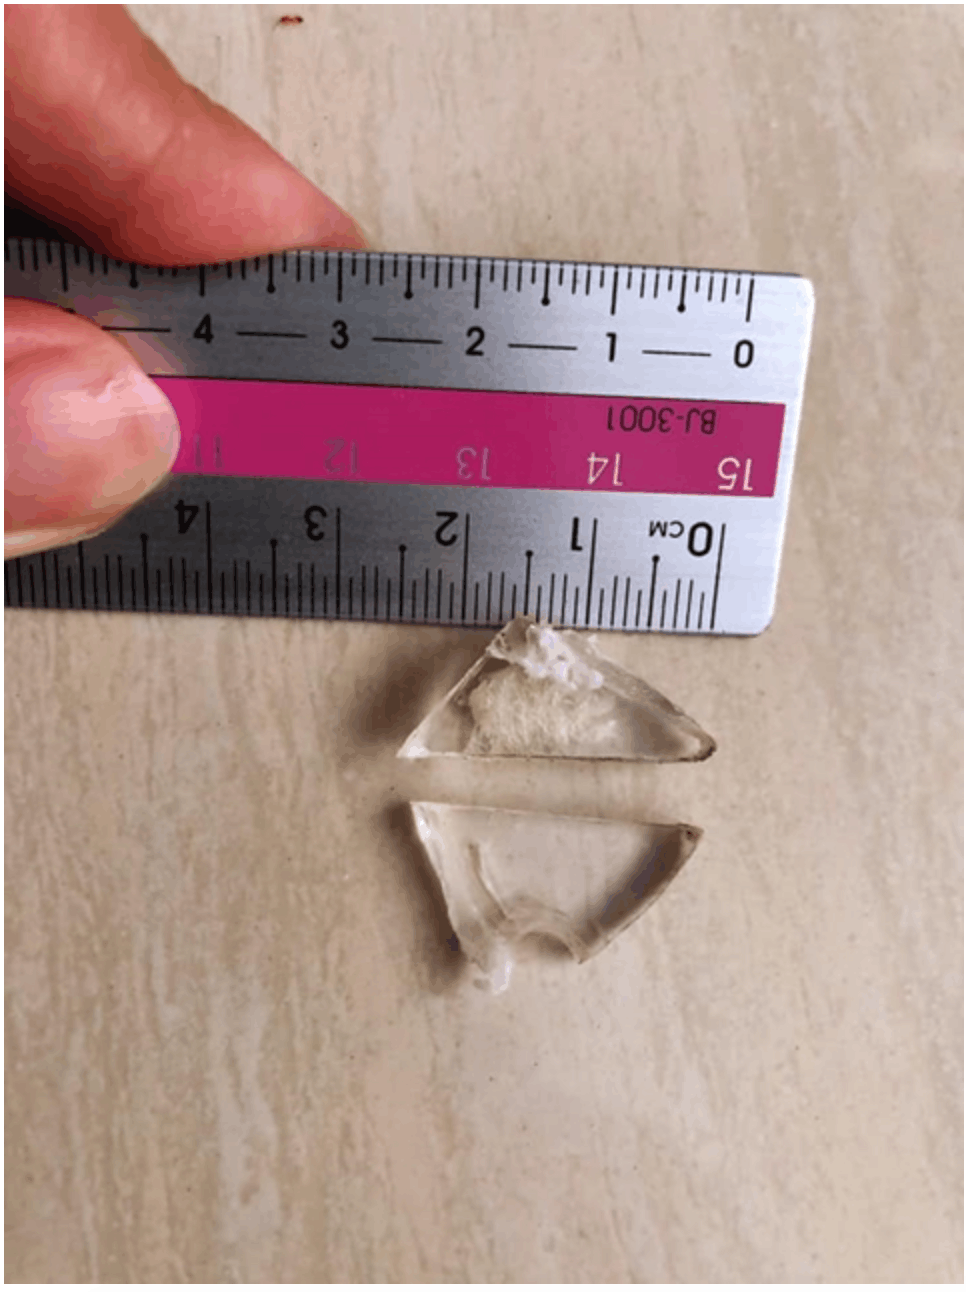 [alert! ] malaysian lady finds glass fragments in her gardenia bread